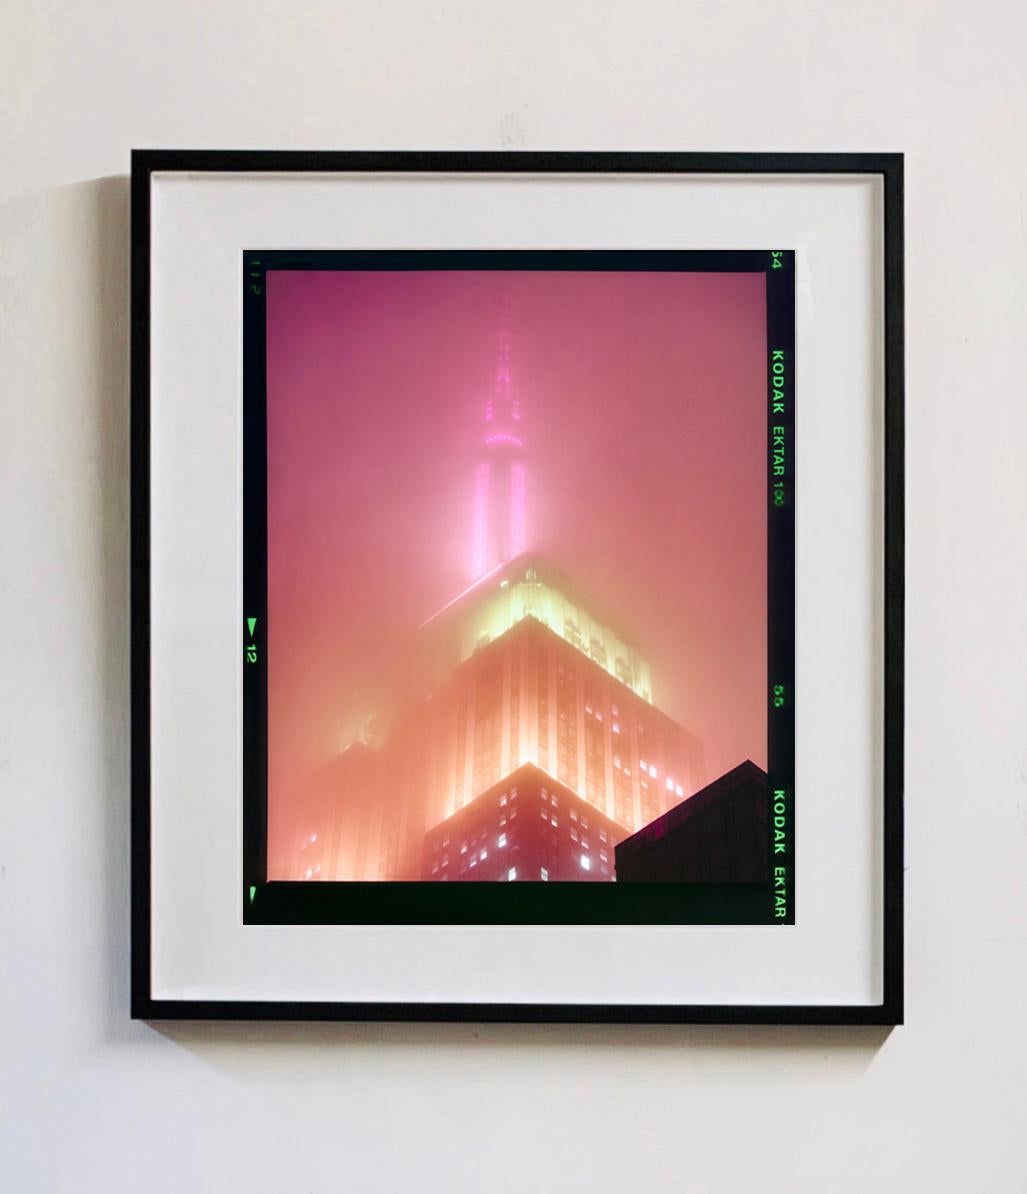 Set of four framed artworks.
'NOMAD (Film Rebate)', New York. Richard Heeps has photographed the iconic Empire State building in the mist. The NOMAD sequence of photographs capture the art deco architecture illuminated by changing colours, and is